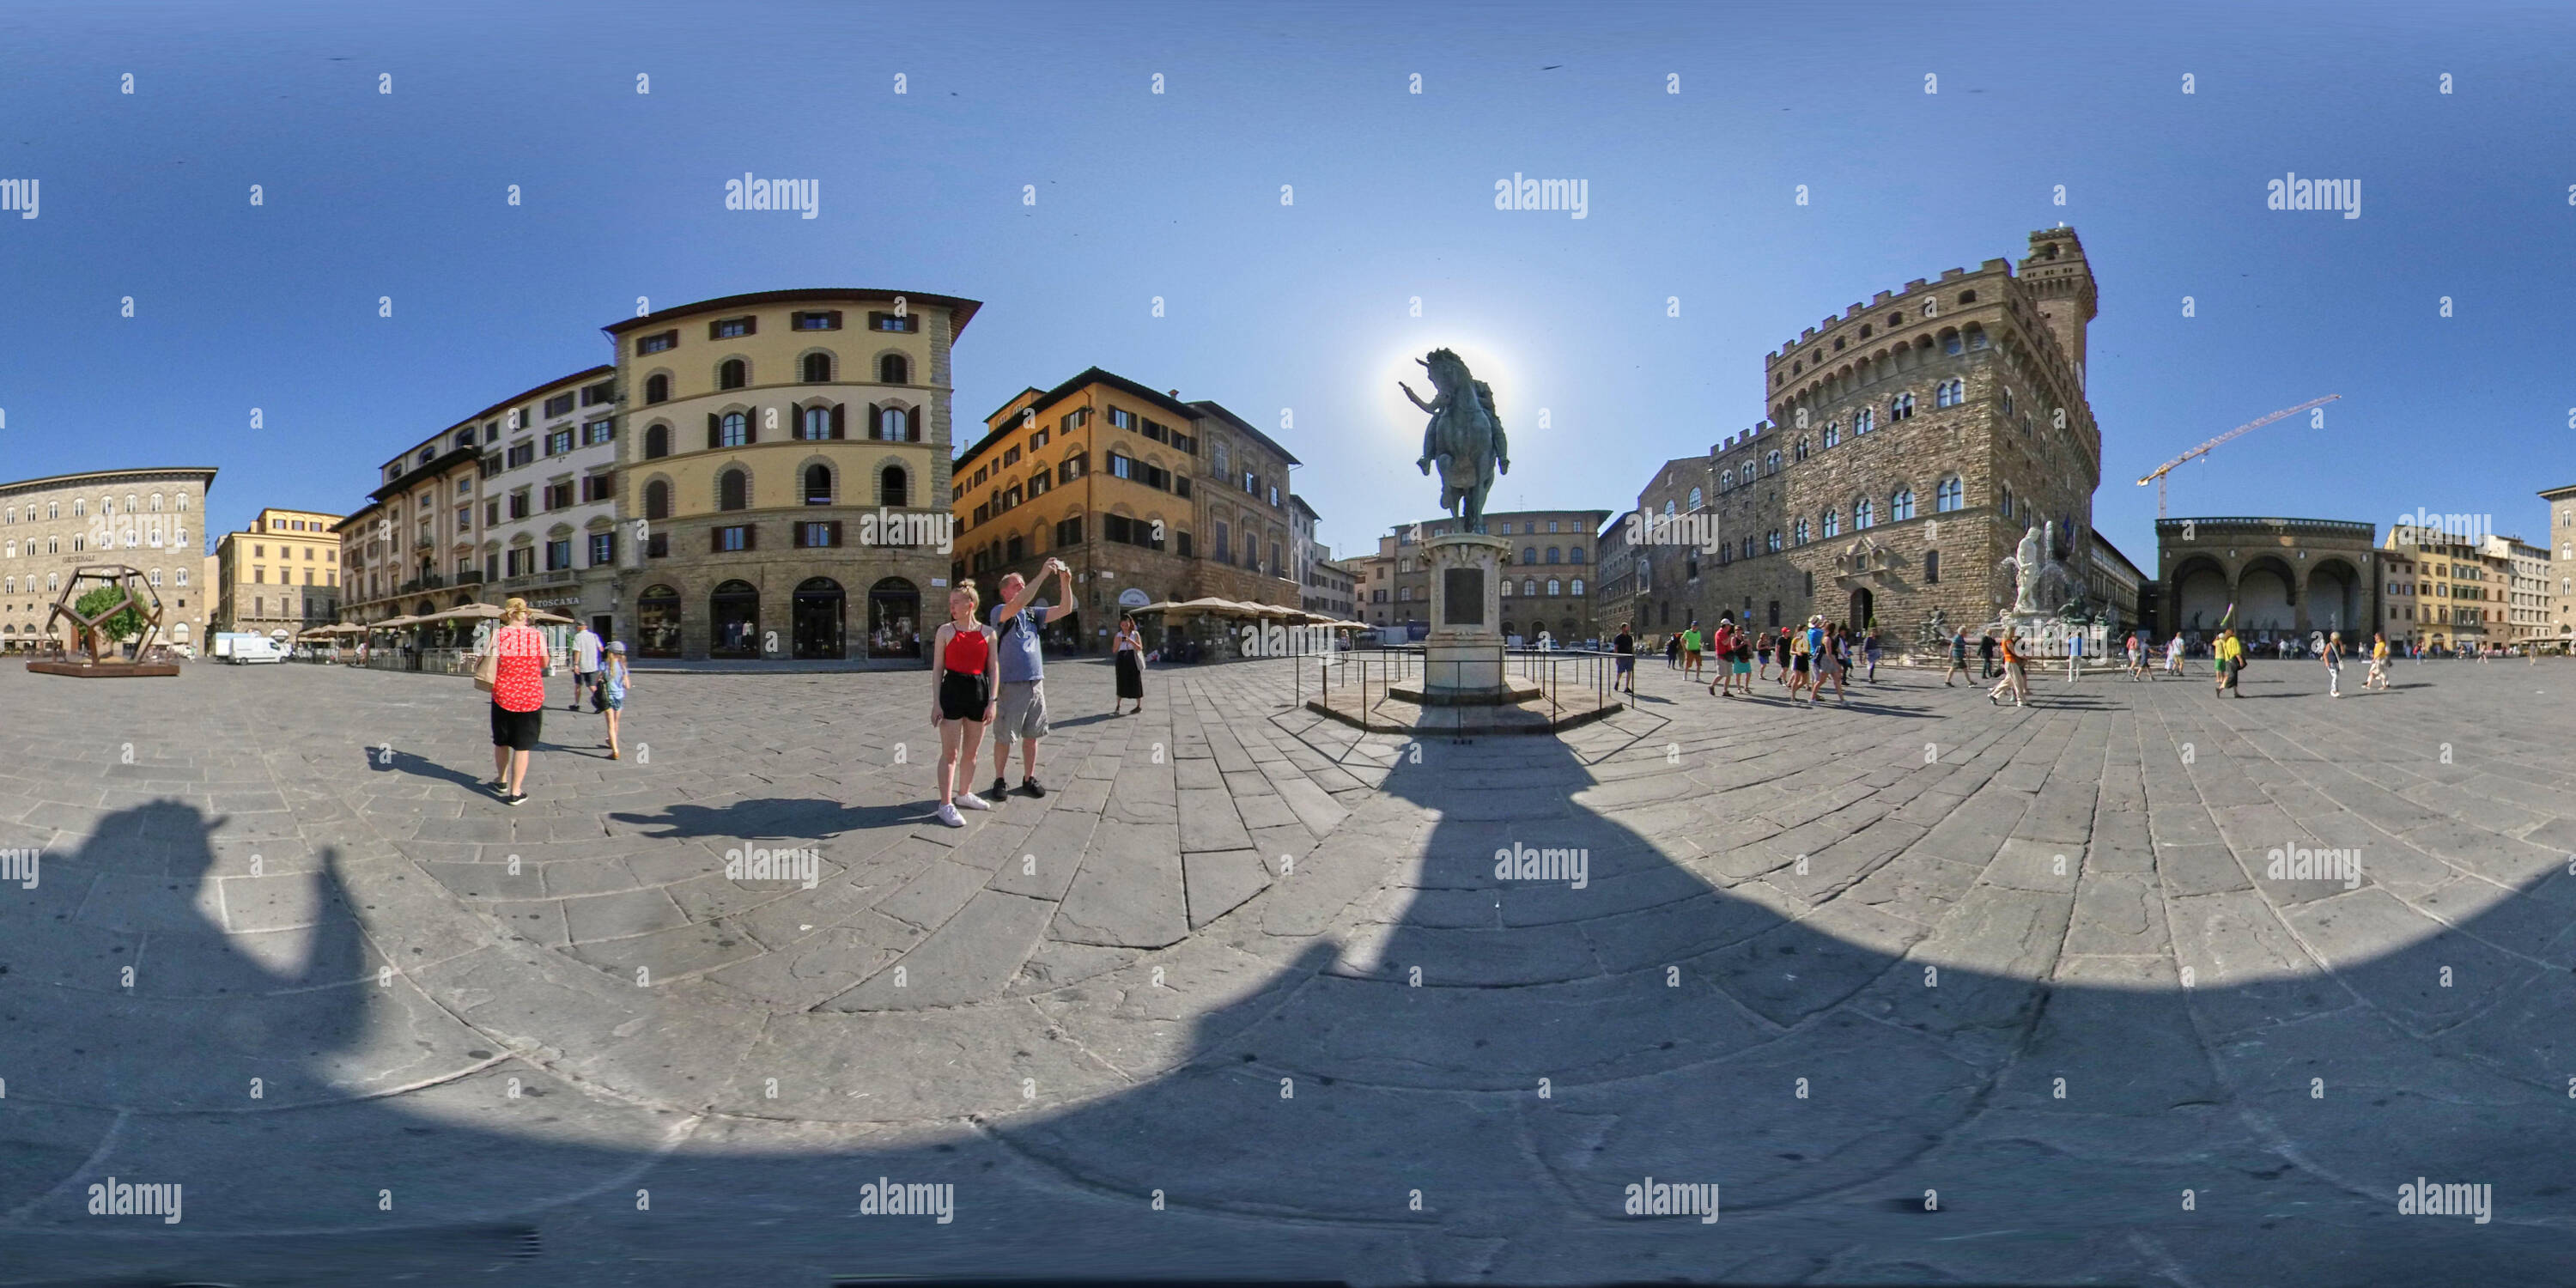 360 degree panoramic view of 360 degree shot of Piazza della Signoria with Equine monument to Cosimo I back lit in centre frame.